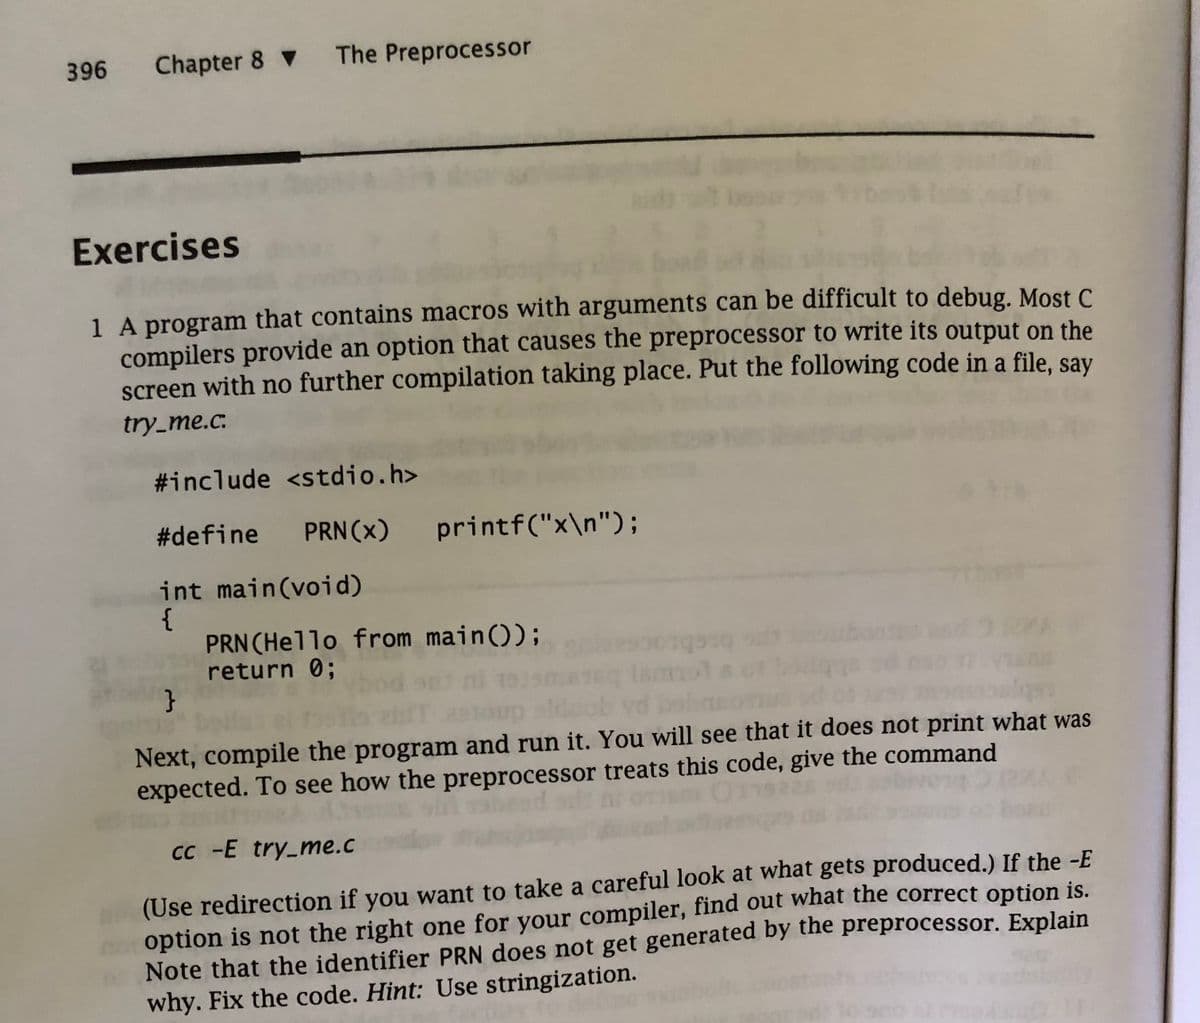 396 Chapter 8▼ The Preprocessor
Exercises
1 A program that contains macros with arguments can be difficult to debug. Most C
compilers provide an option that causes the preprocessor to write its output on the
screen with no further compilation taking place. Put the following code in a file, say
try_me.c.
#include <stdio.h>
#define PRN (X)
int main(void)
{
printf("x\n");
PRN (Hello from main());
return 0;
BETO
}
Next, compile the program and run it. You will see that it does not print what was
expected. To see how the preprocessor treats this code, give the command
cc -E try_me.c
(Use redirection if you want to take a careful look at what gets produced.) If the -E
option is not the right one for your compiler, find out what the correct option is.
Note that the identifier PRN does not get generated by the preprocessor. Explain
why. Fix the code. Hint: Use stringization.